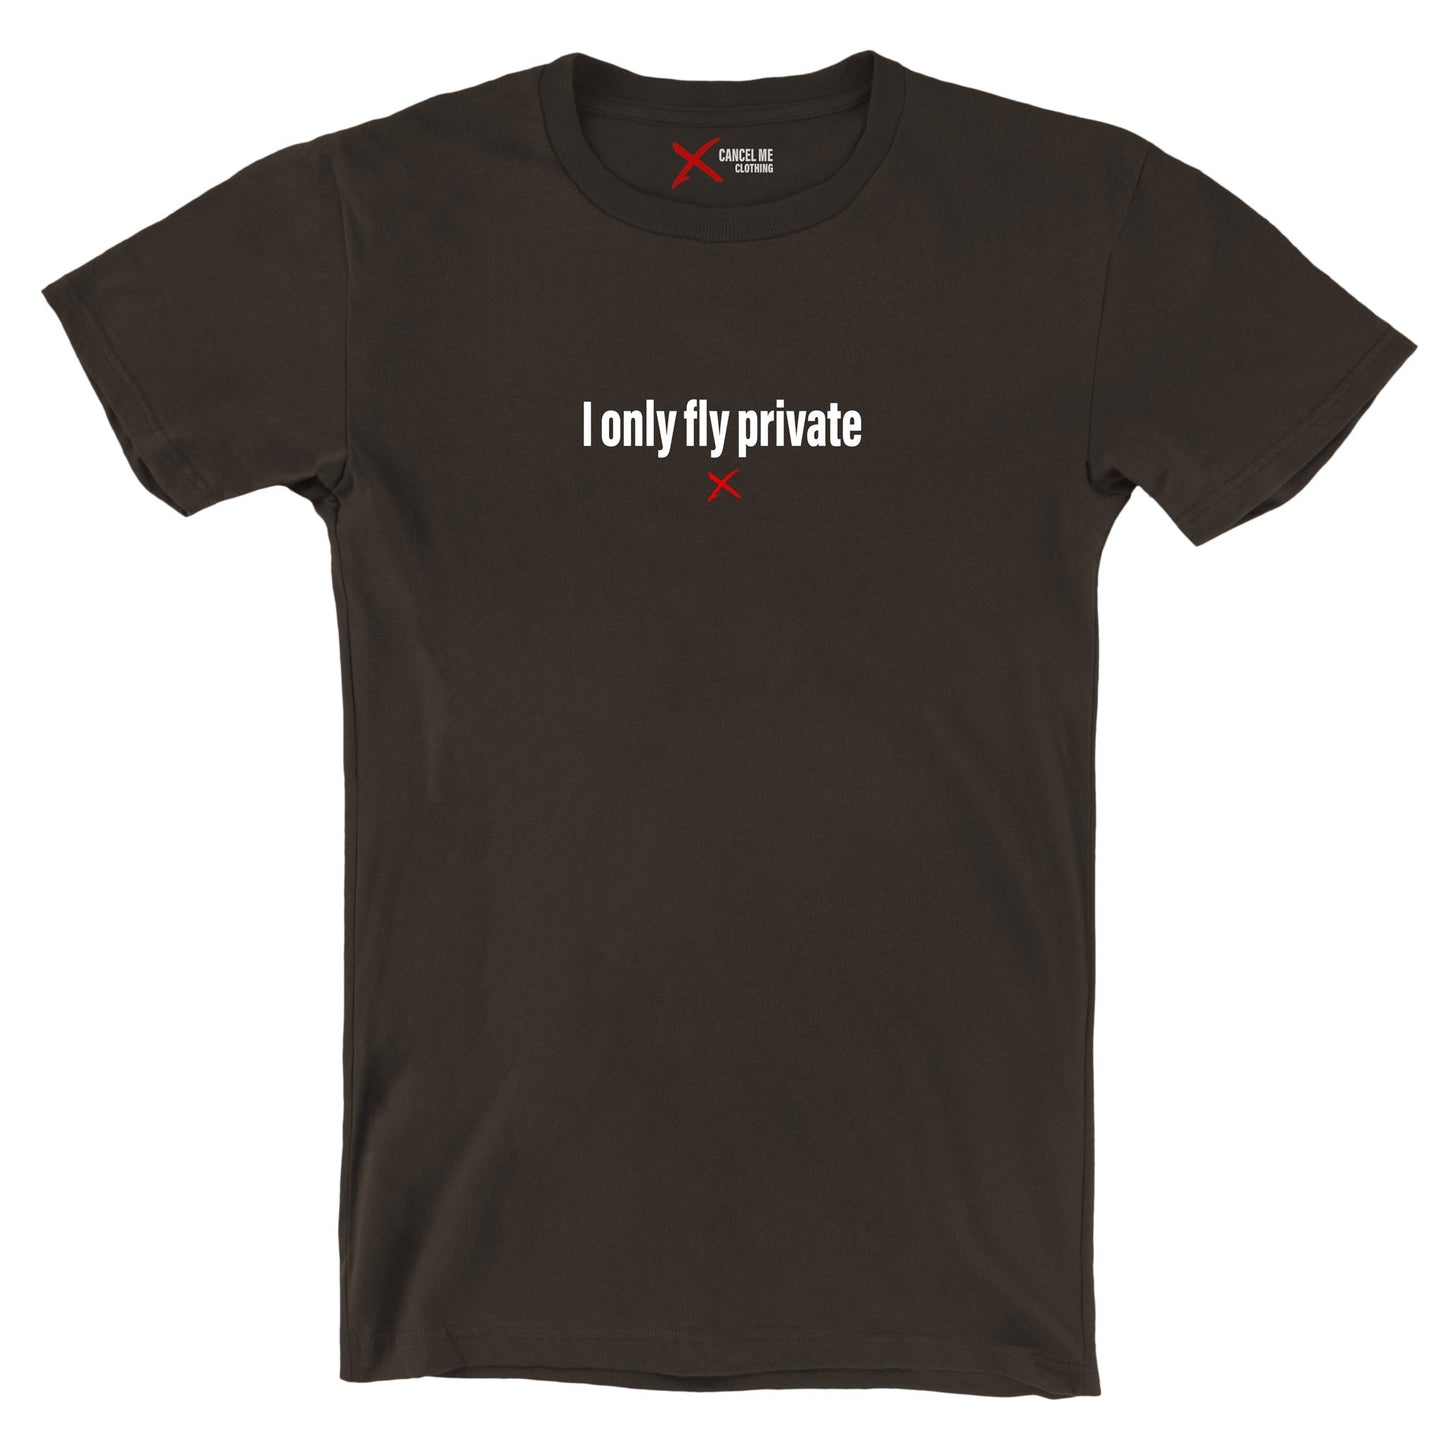 I only fly private - Shirt